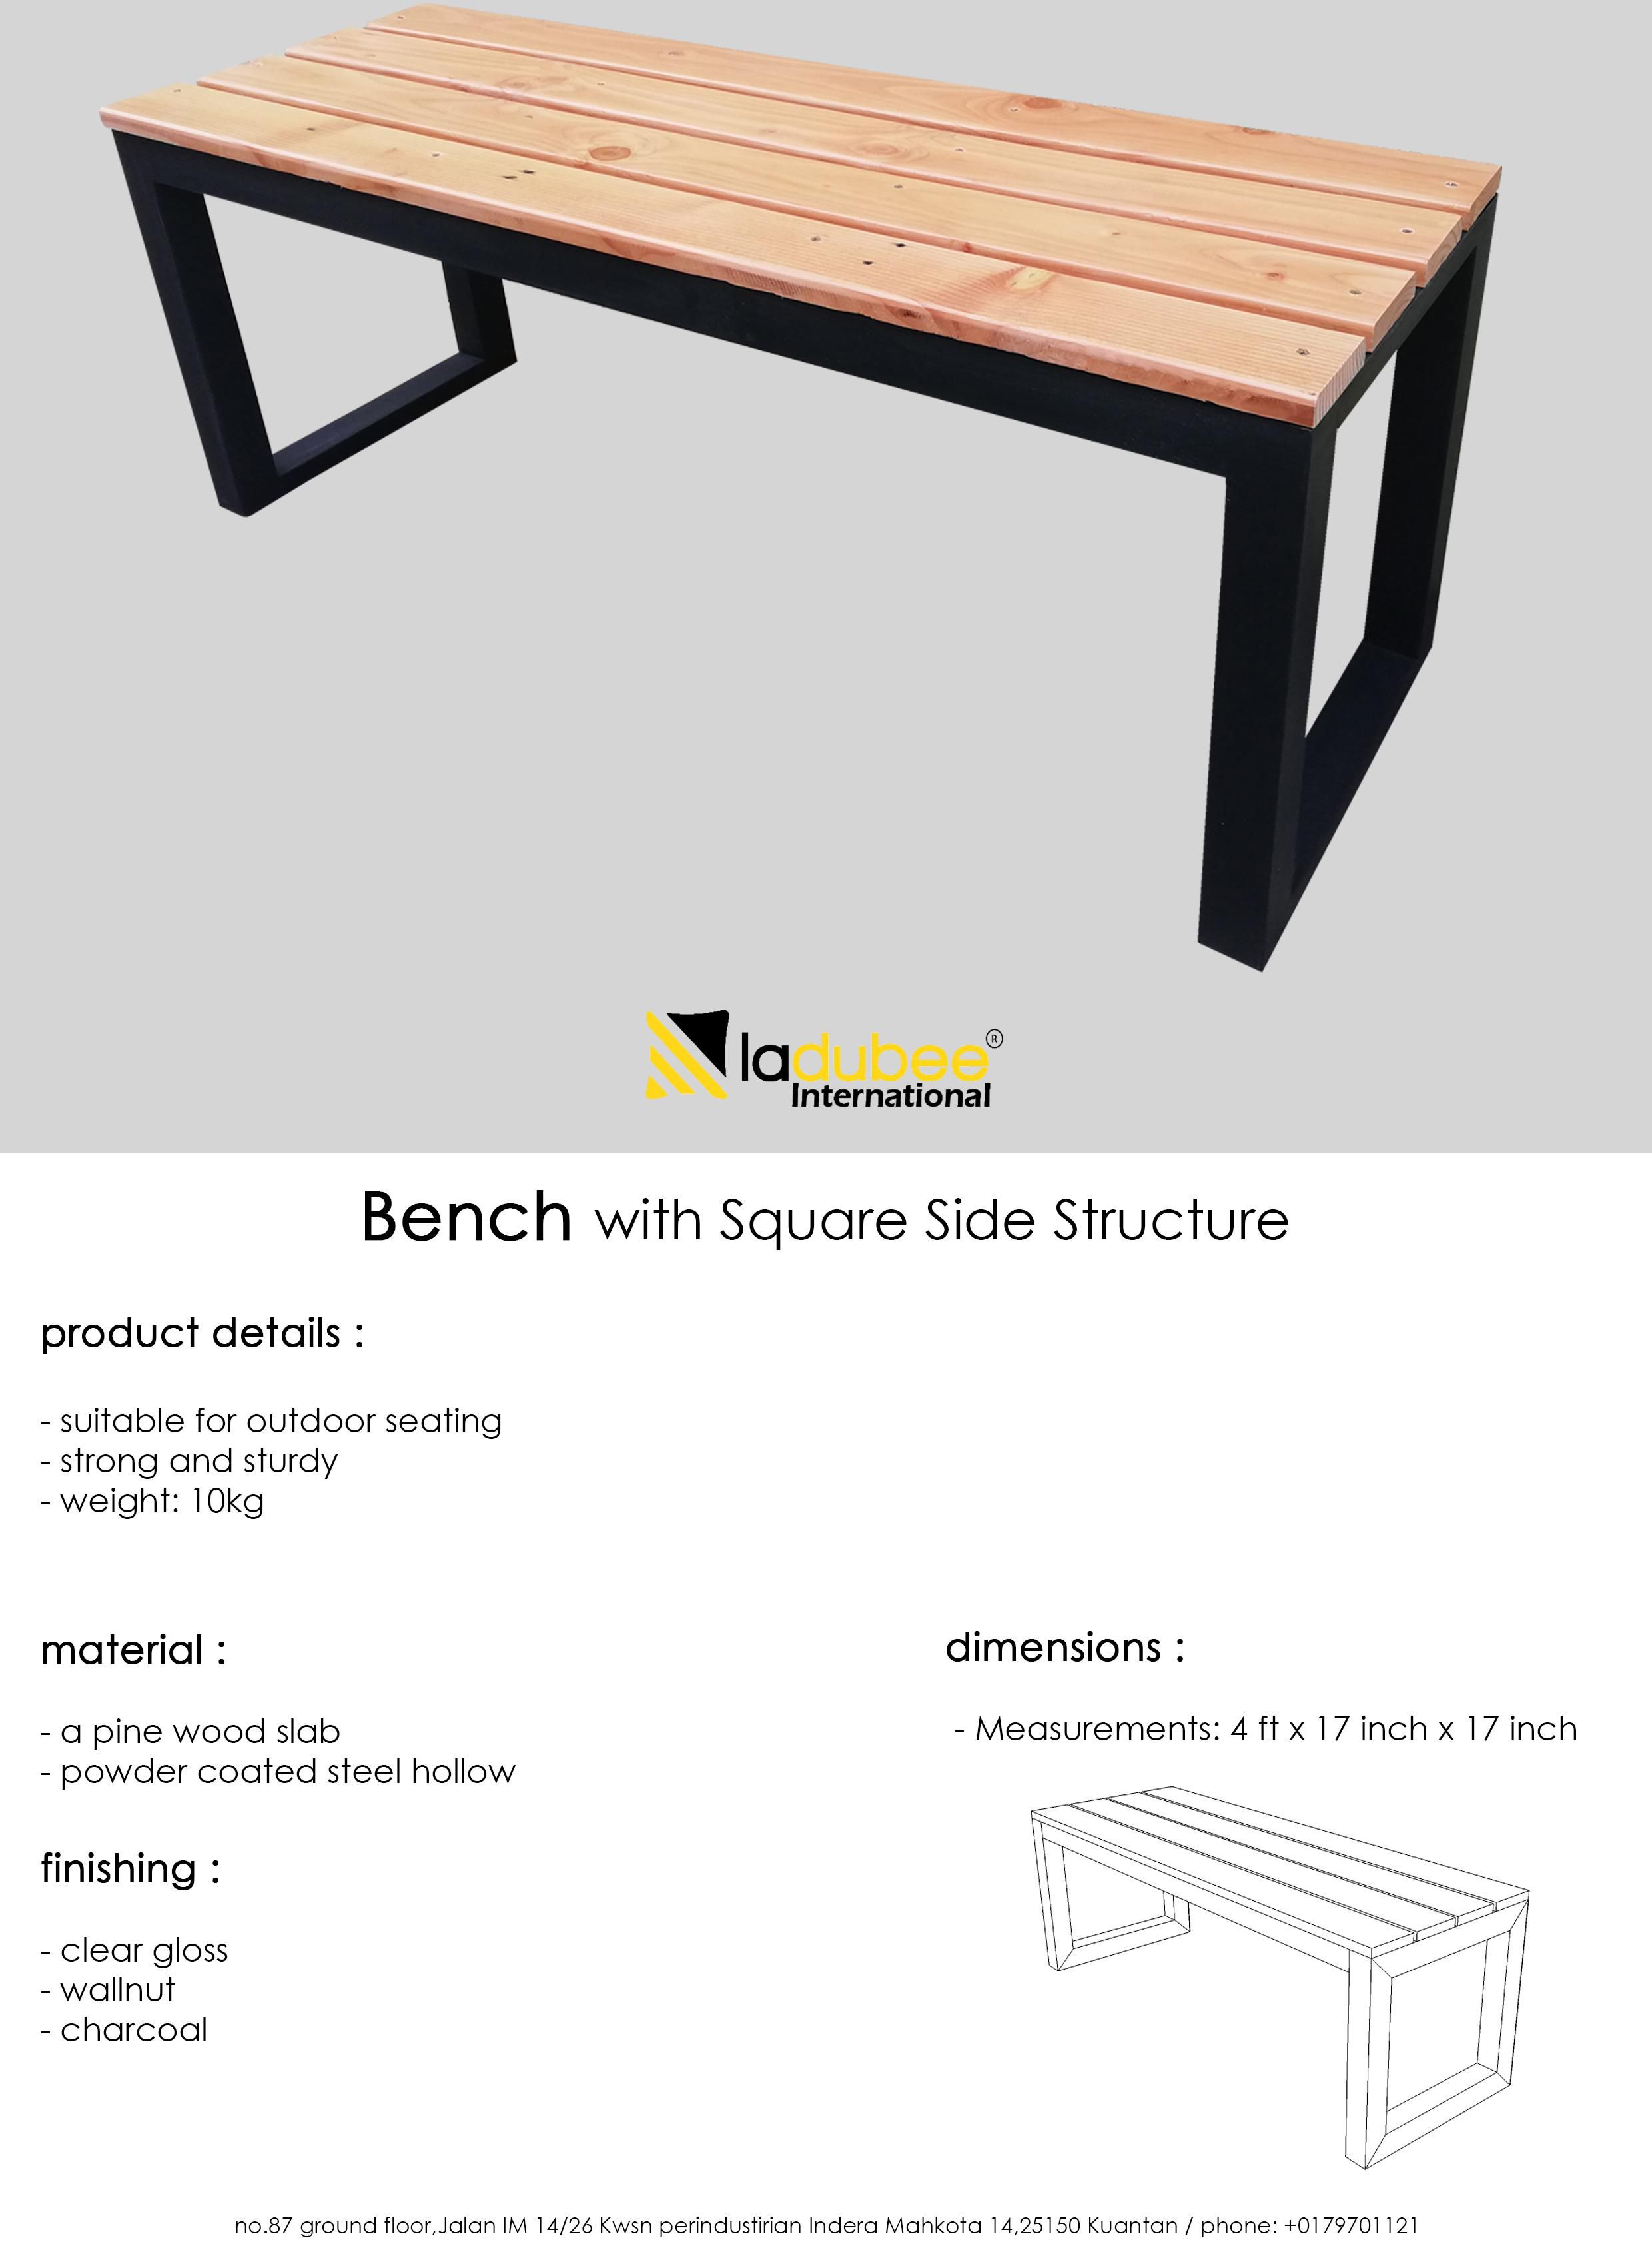 Ladubee® Bench with Square Side Structure